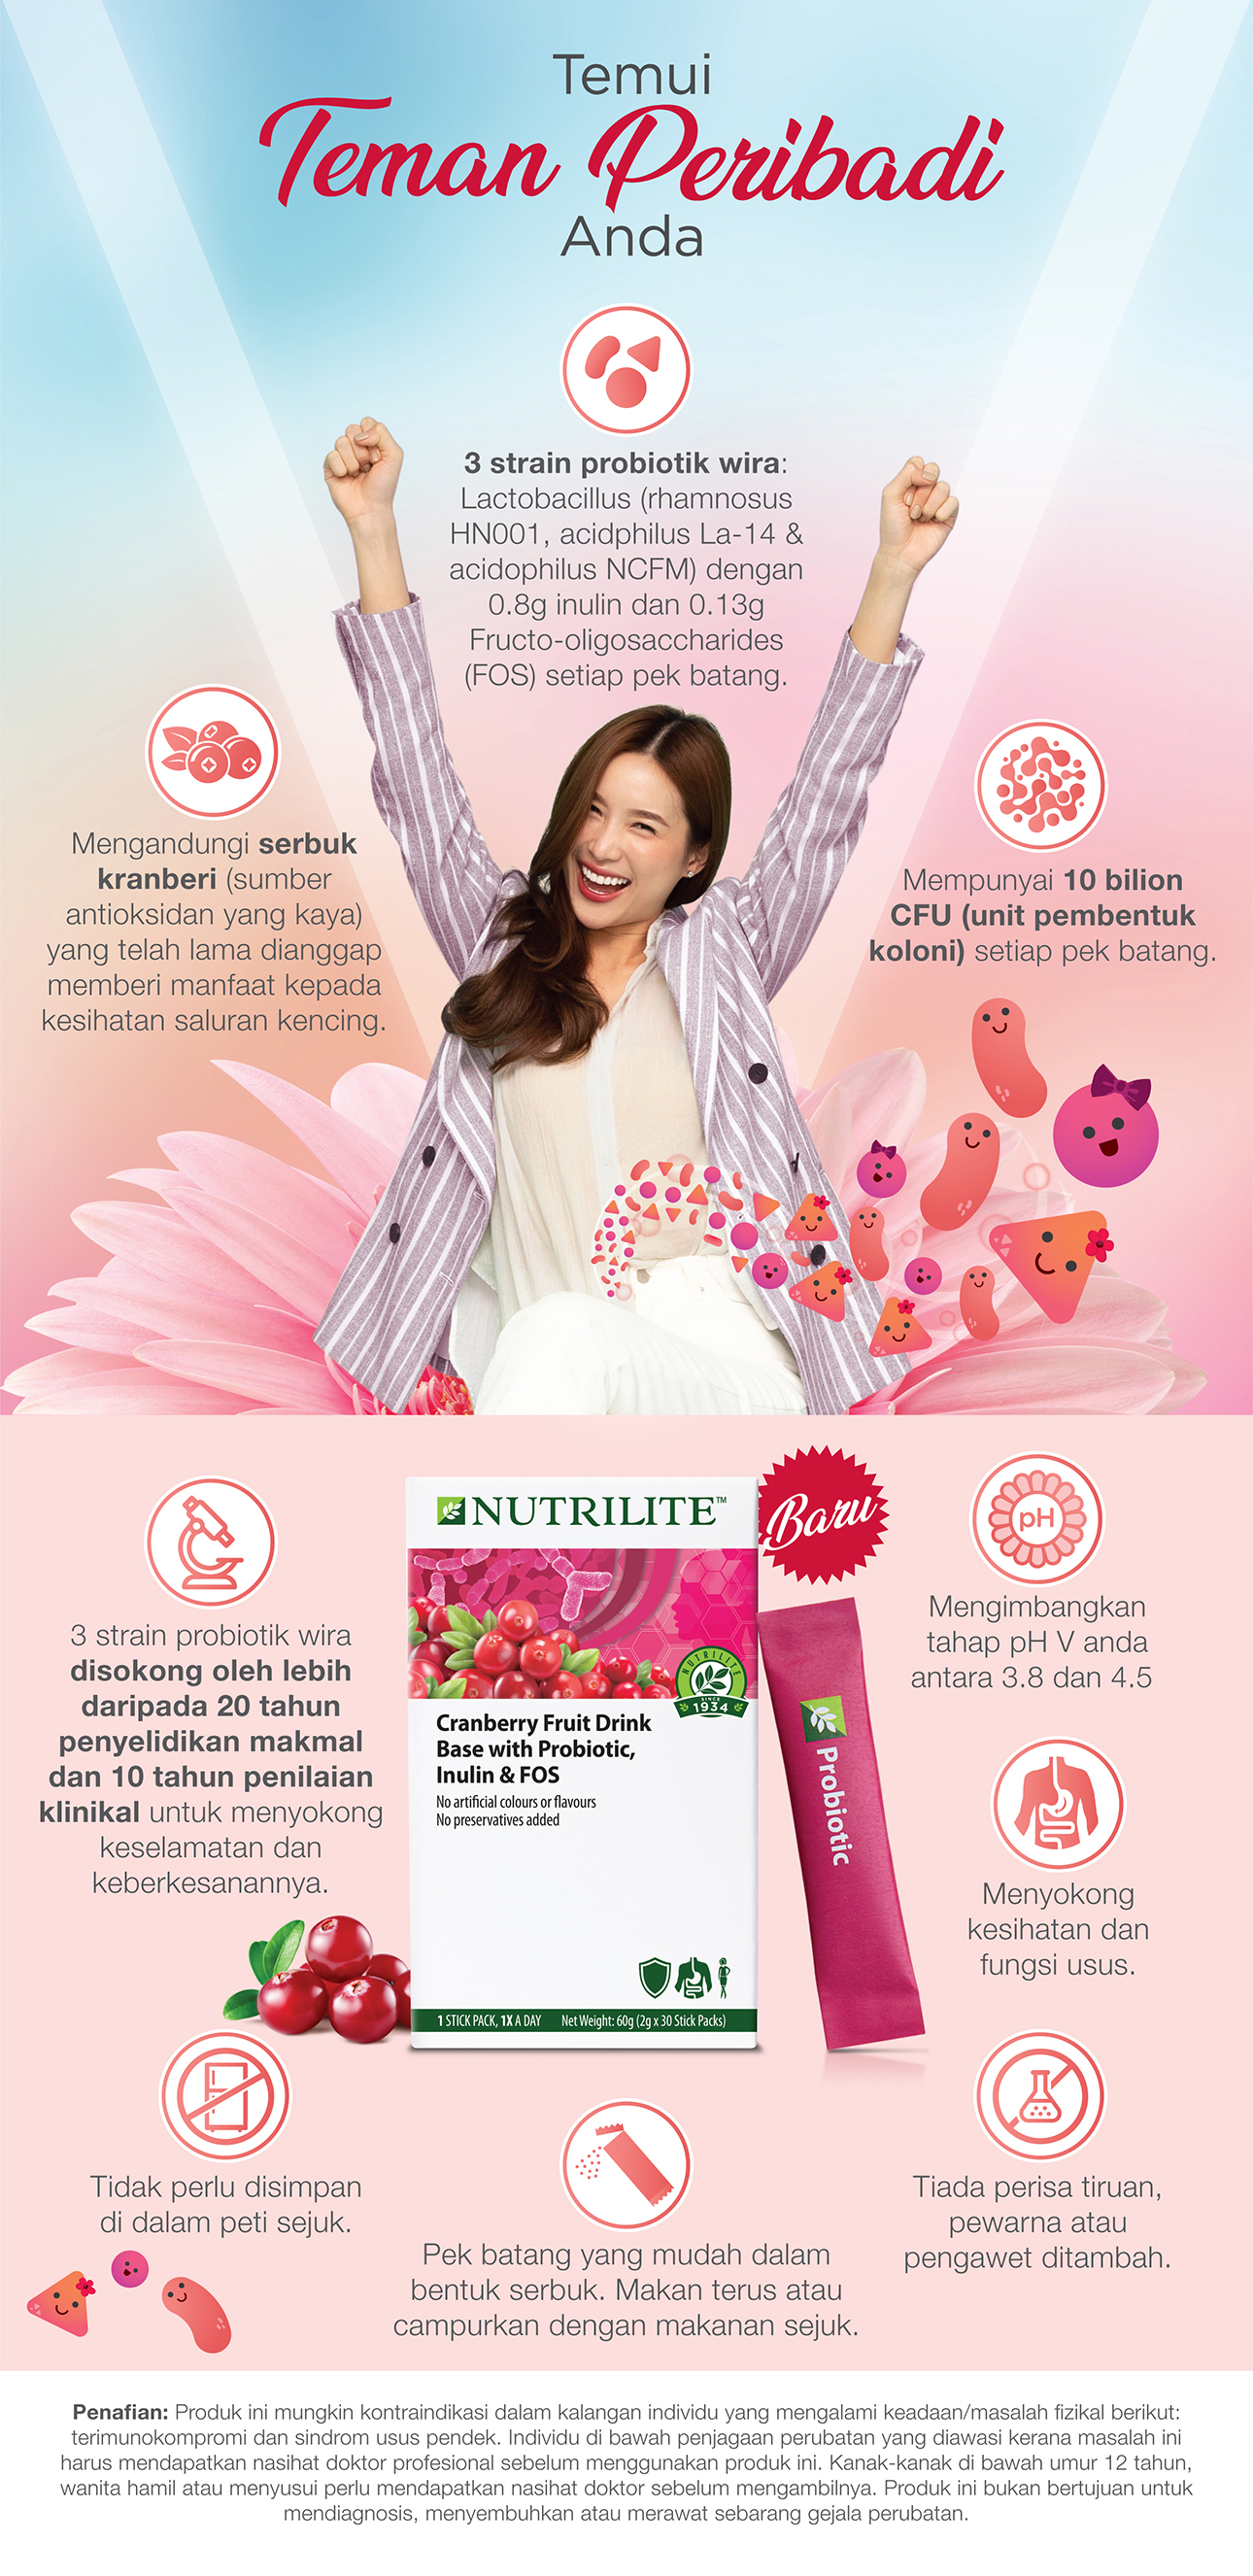 Nutrilite Cranberry Fruit Drink Base with Probiotic, Inulin & FOS